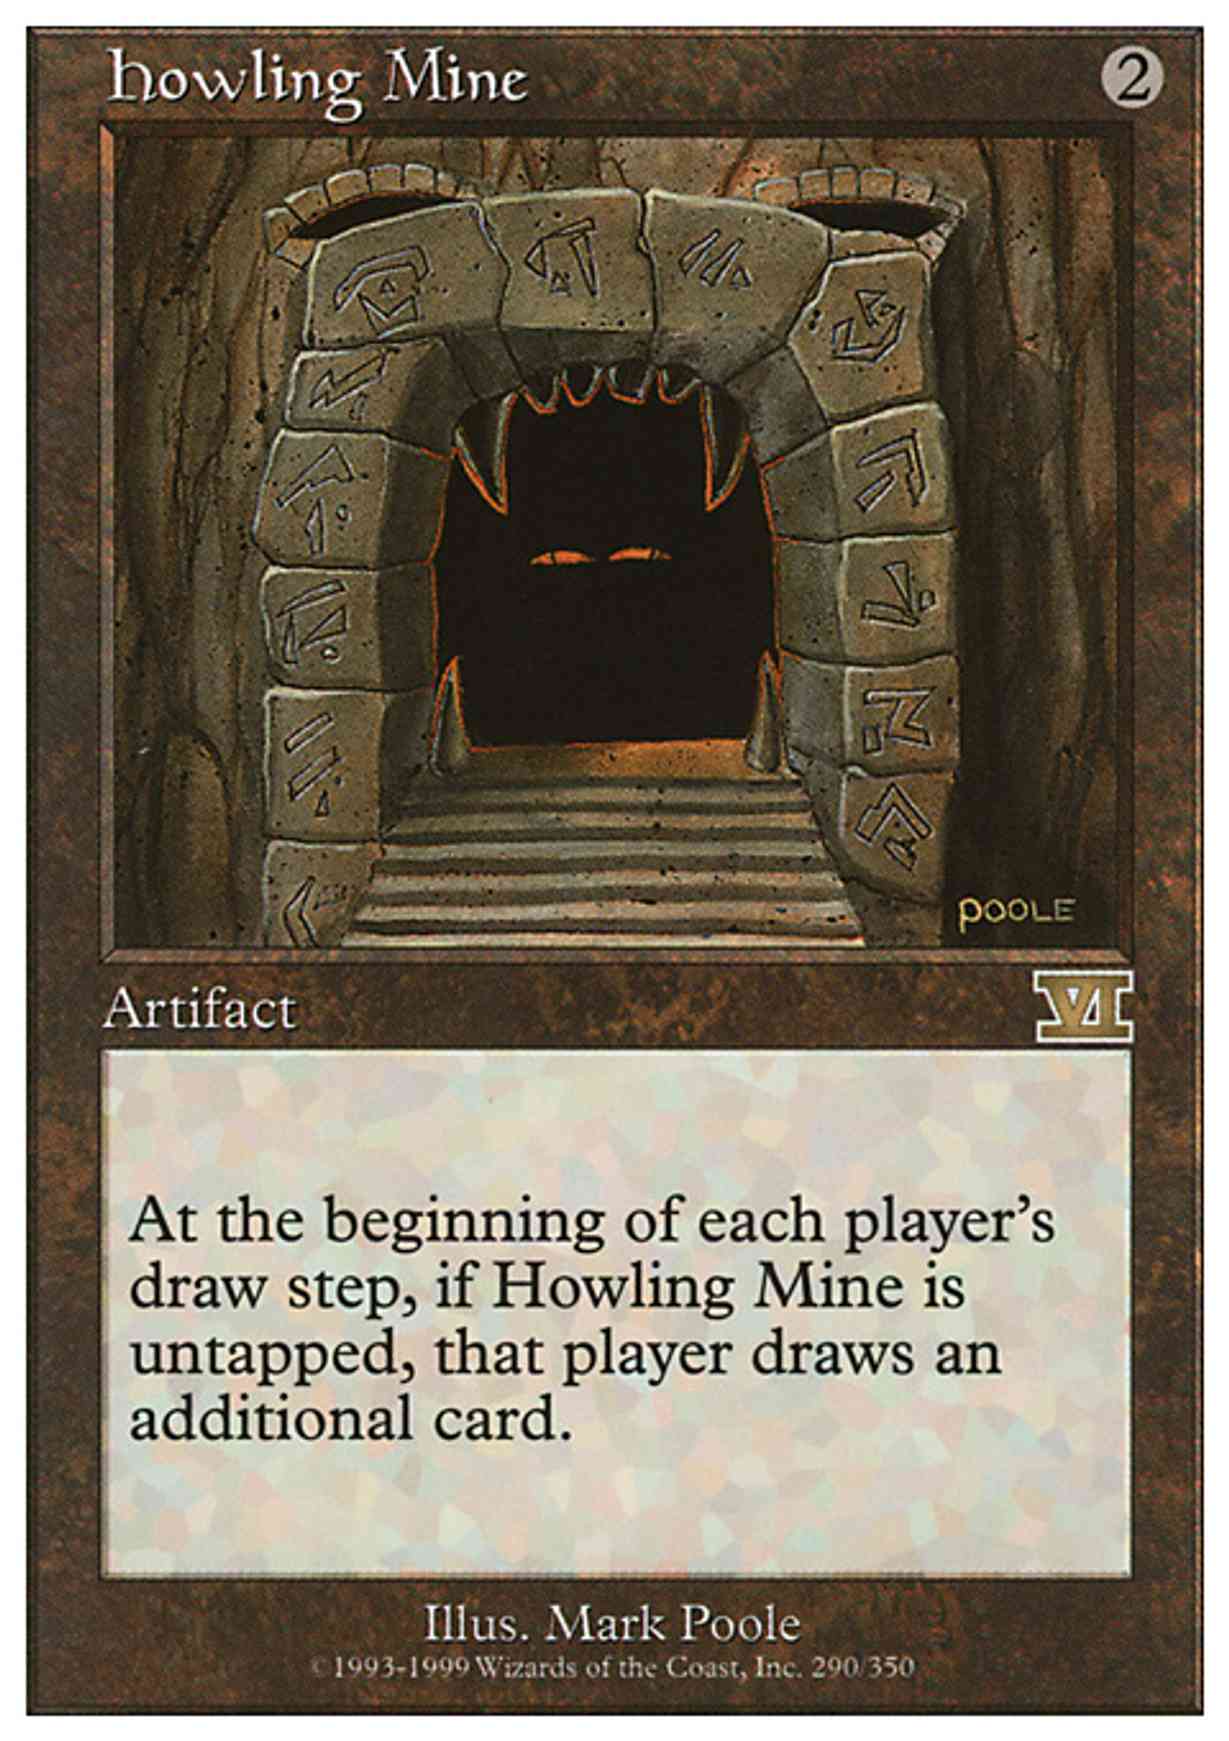 Howling Mine magic card front